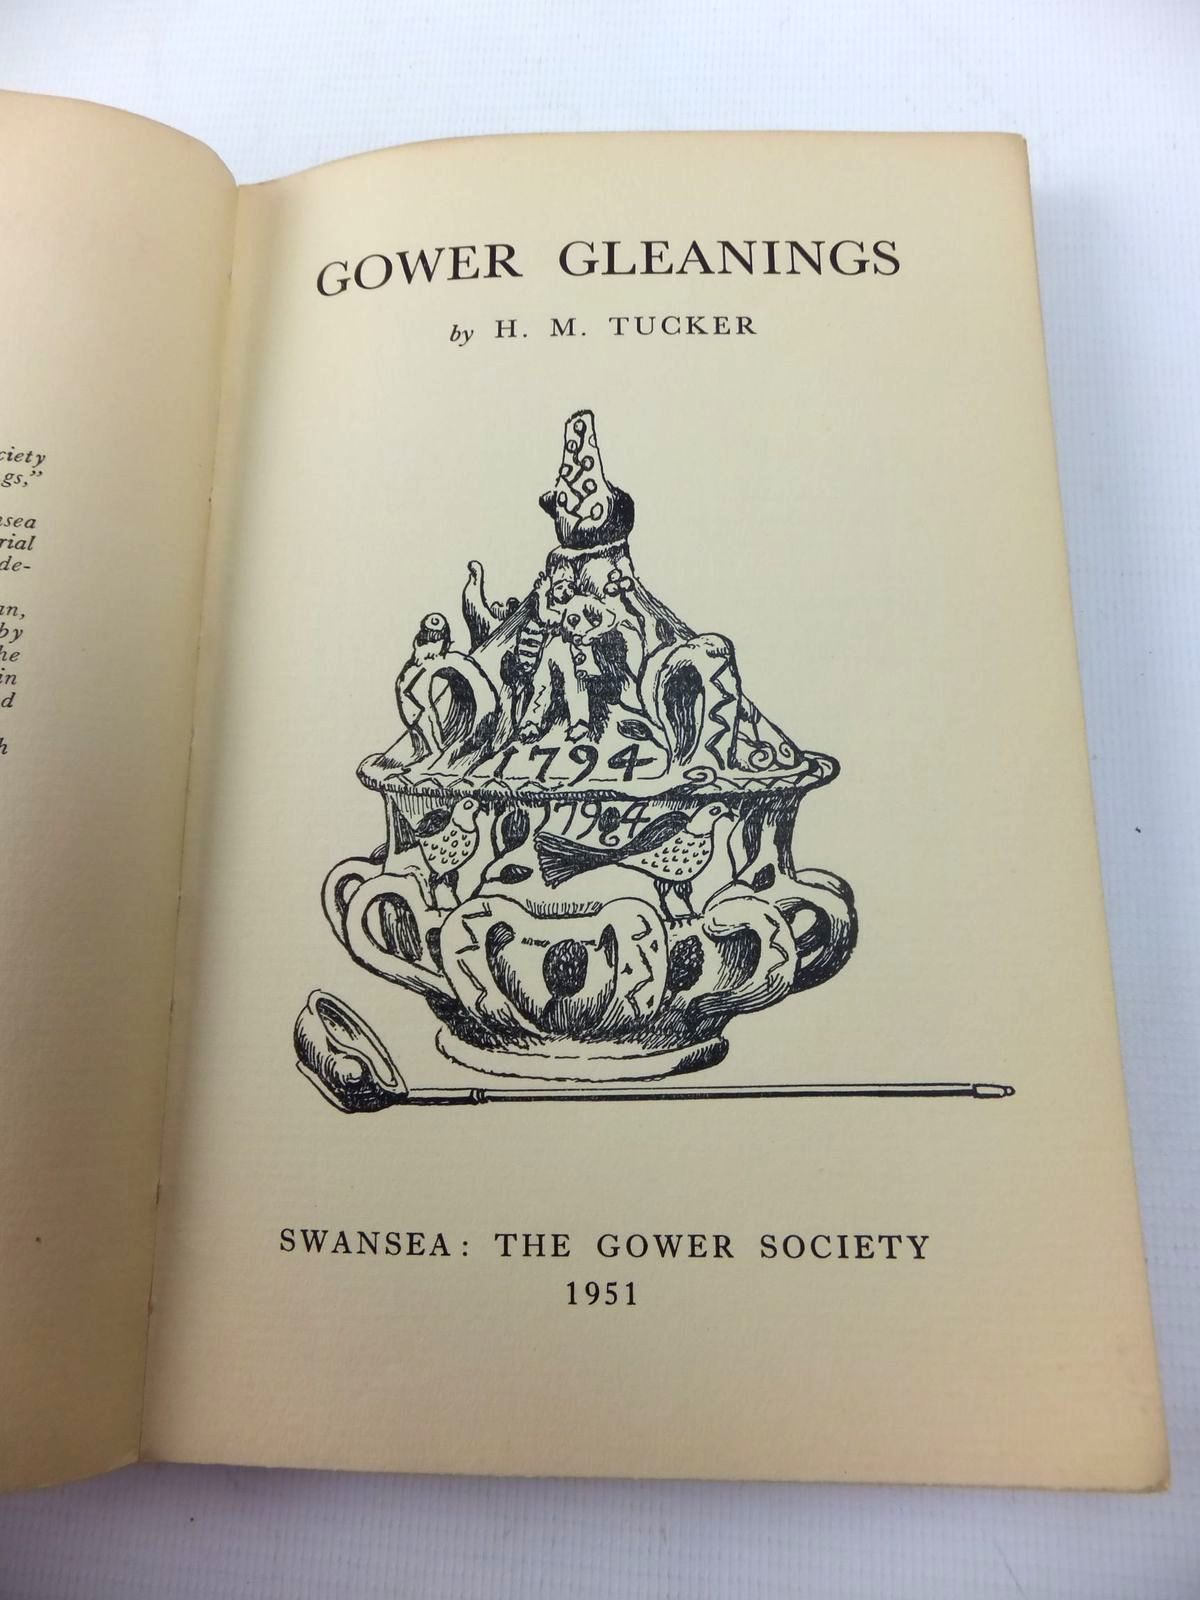 Photo of GOWER GLEANINGS written by Tucker, H.M. illustrated by Morgan, E. Ernest published by The Gower Society (STOCK CODE: 1814561)  for sale by Stella & Rose's Books